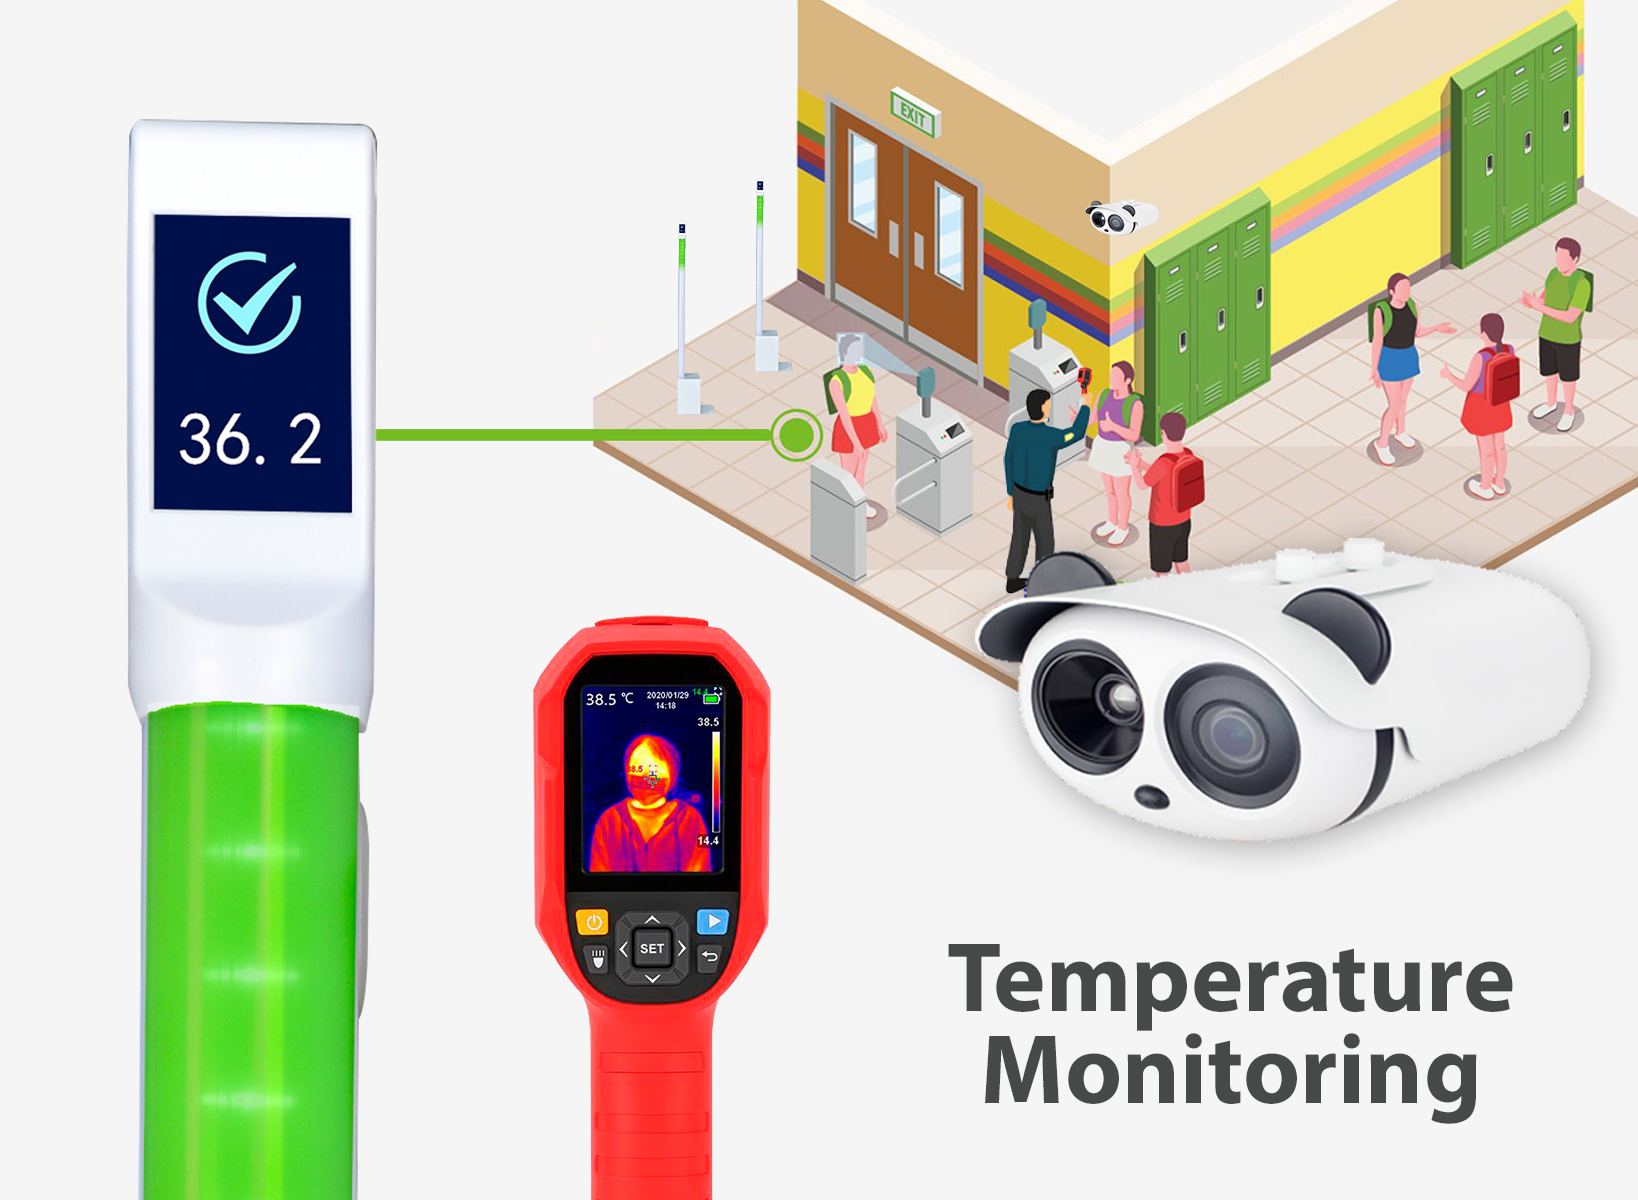 ZKTeco Back to School Access Control Systems with temperature detection